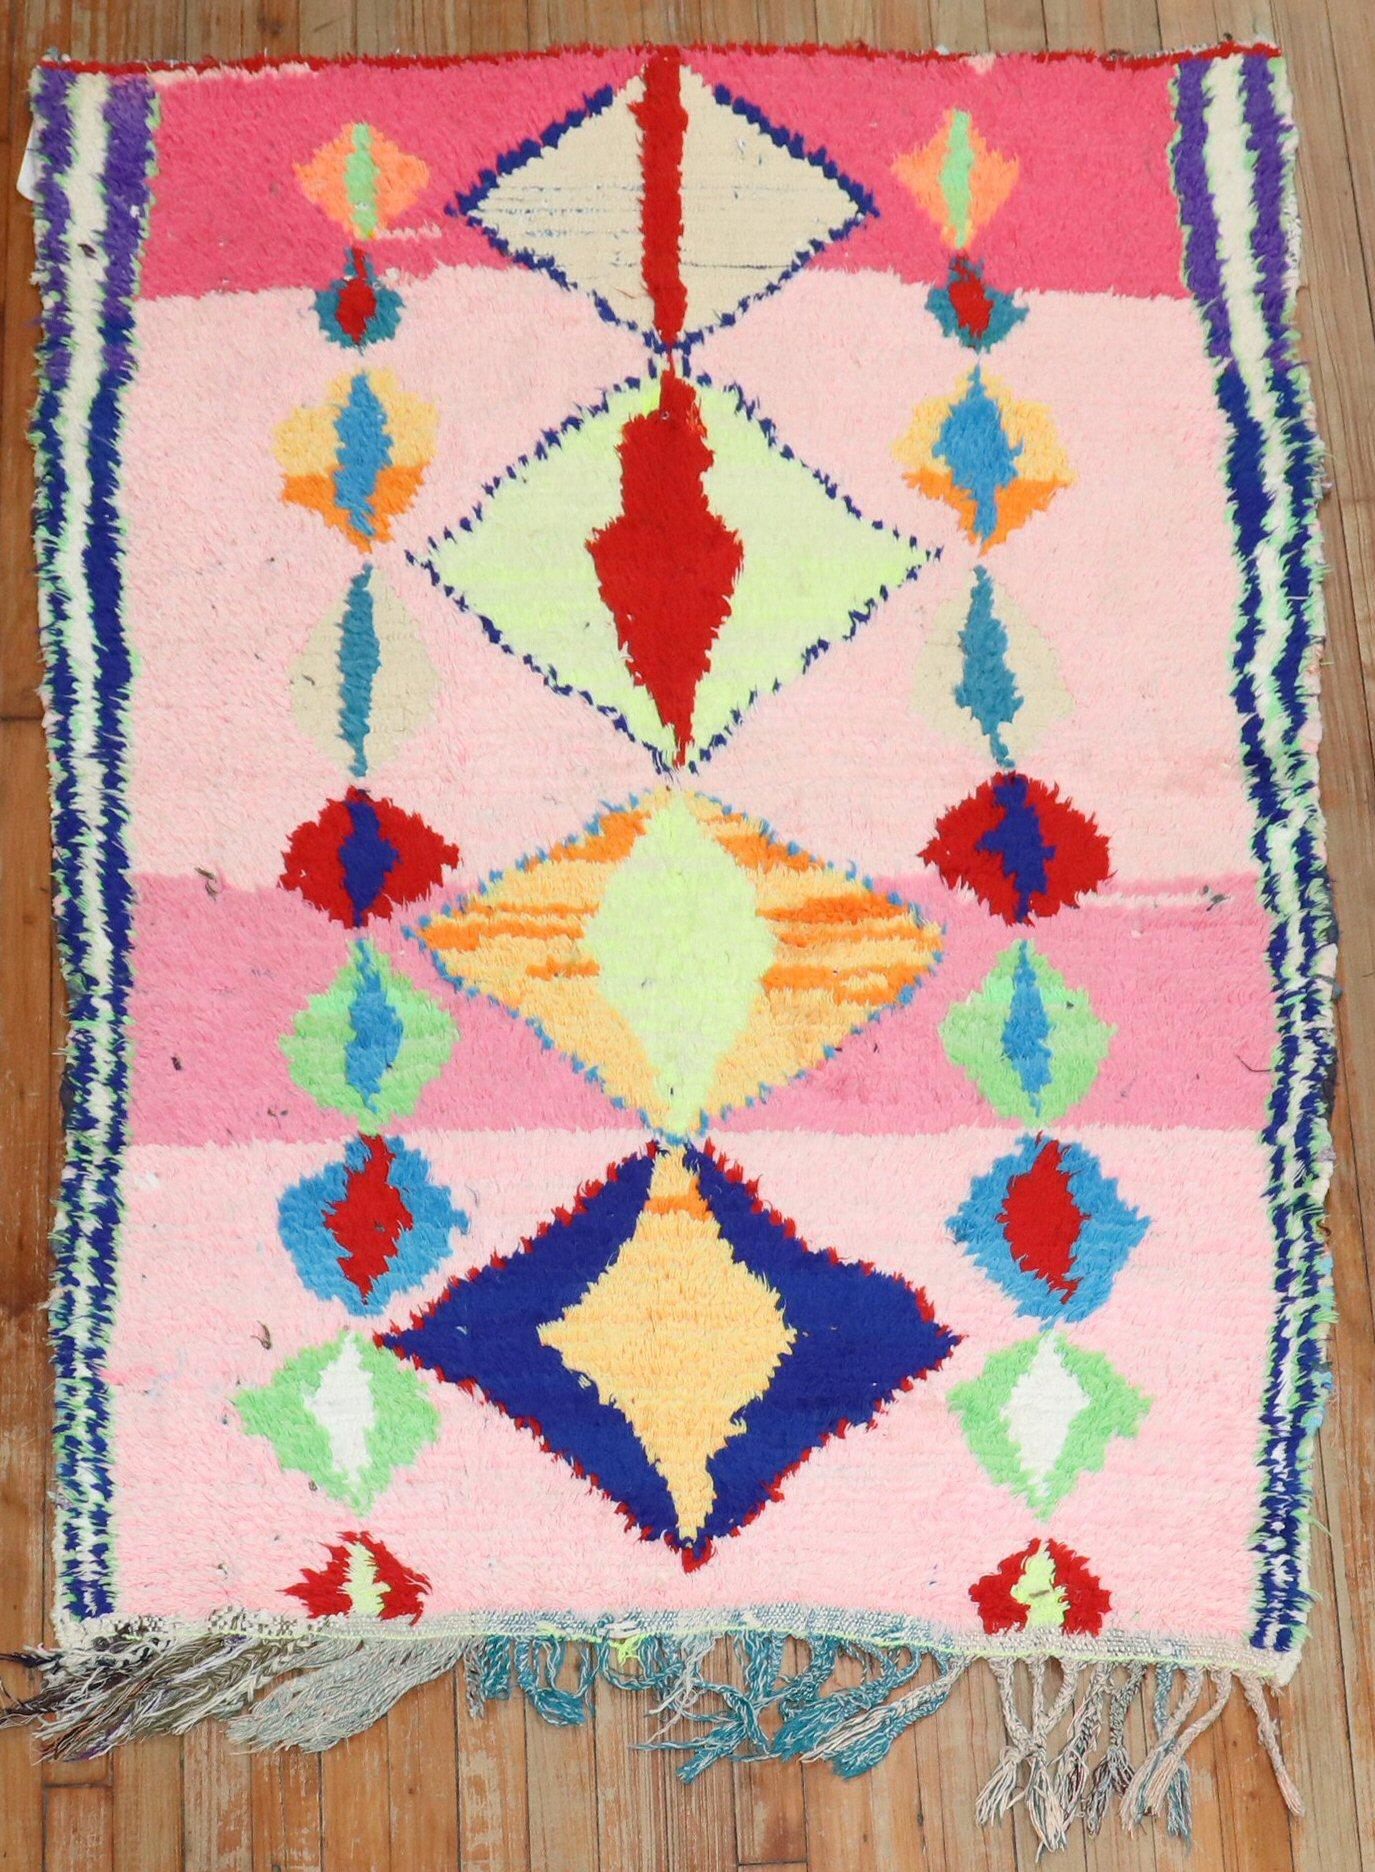 A Mid-20th century Moroccan small accent rug with a wild abstract motif on a striated bubble gum pink ground. This piece is pretty wild and fun. If you are in love take a dive and make a big splash!

Measures: 4' x 5'4''.
 
 